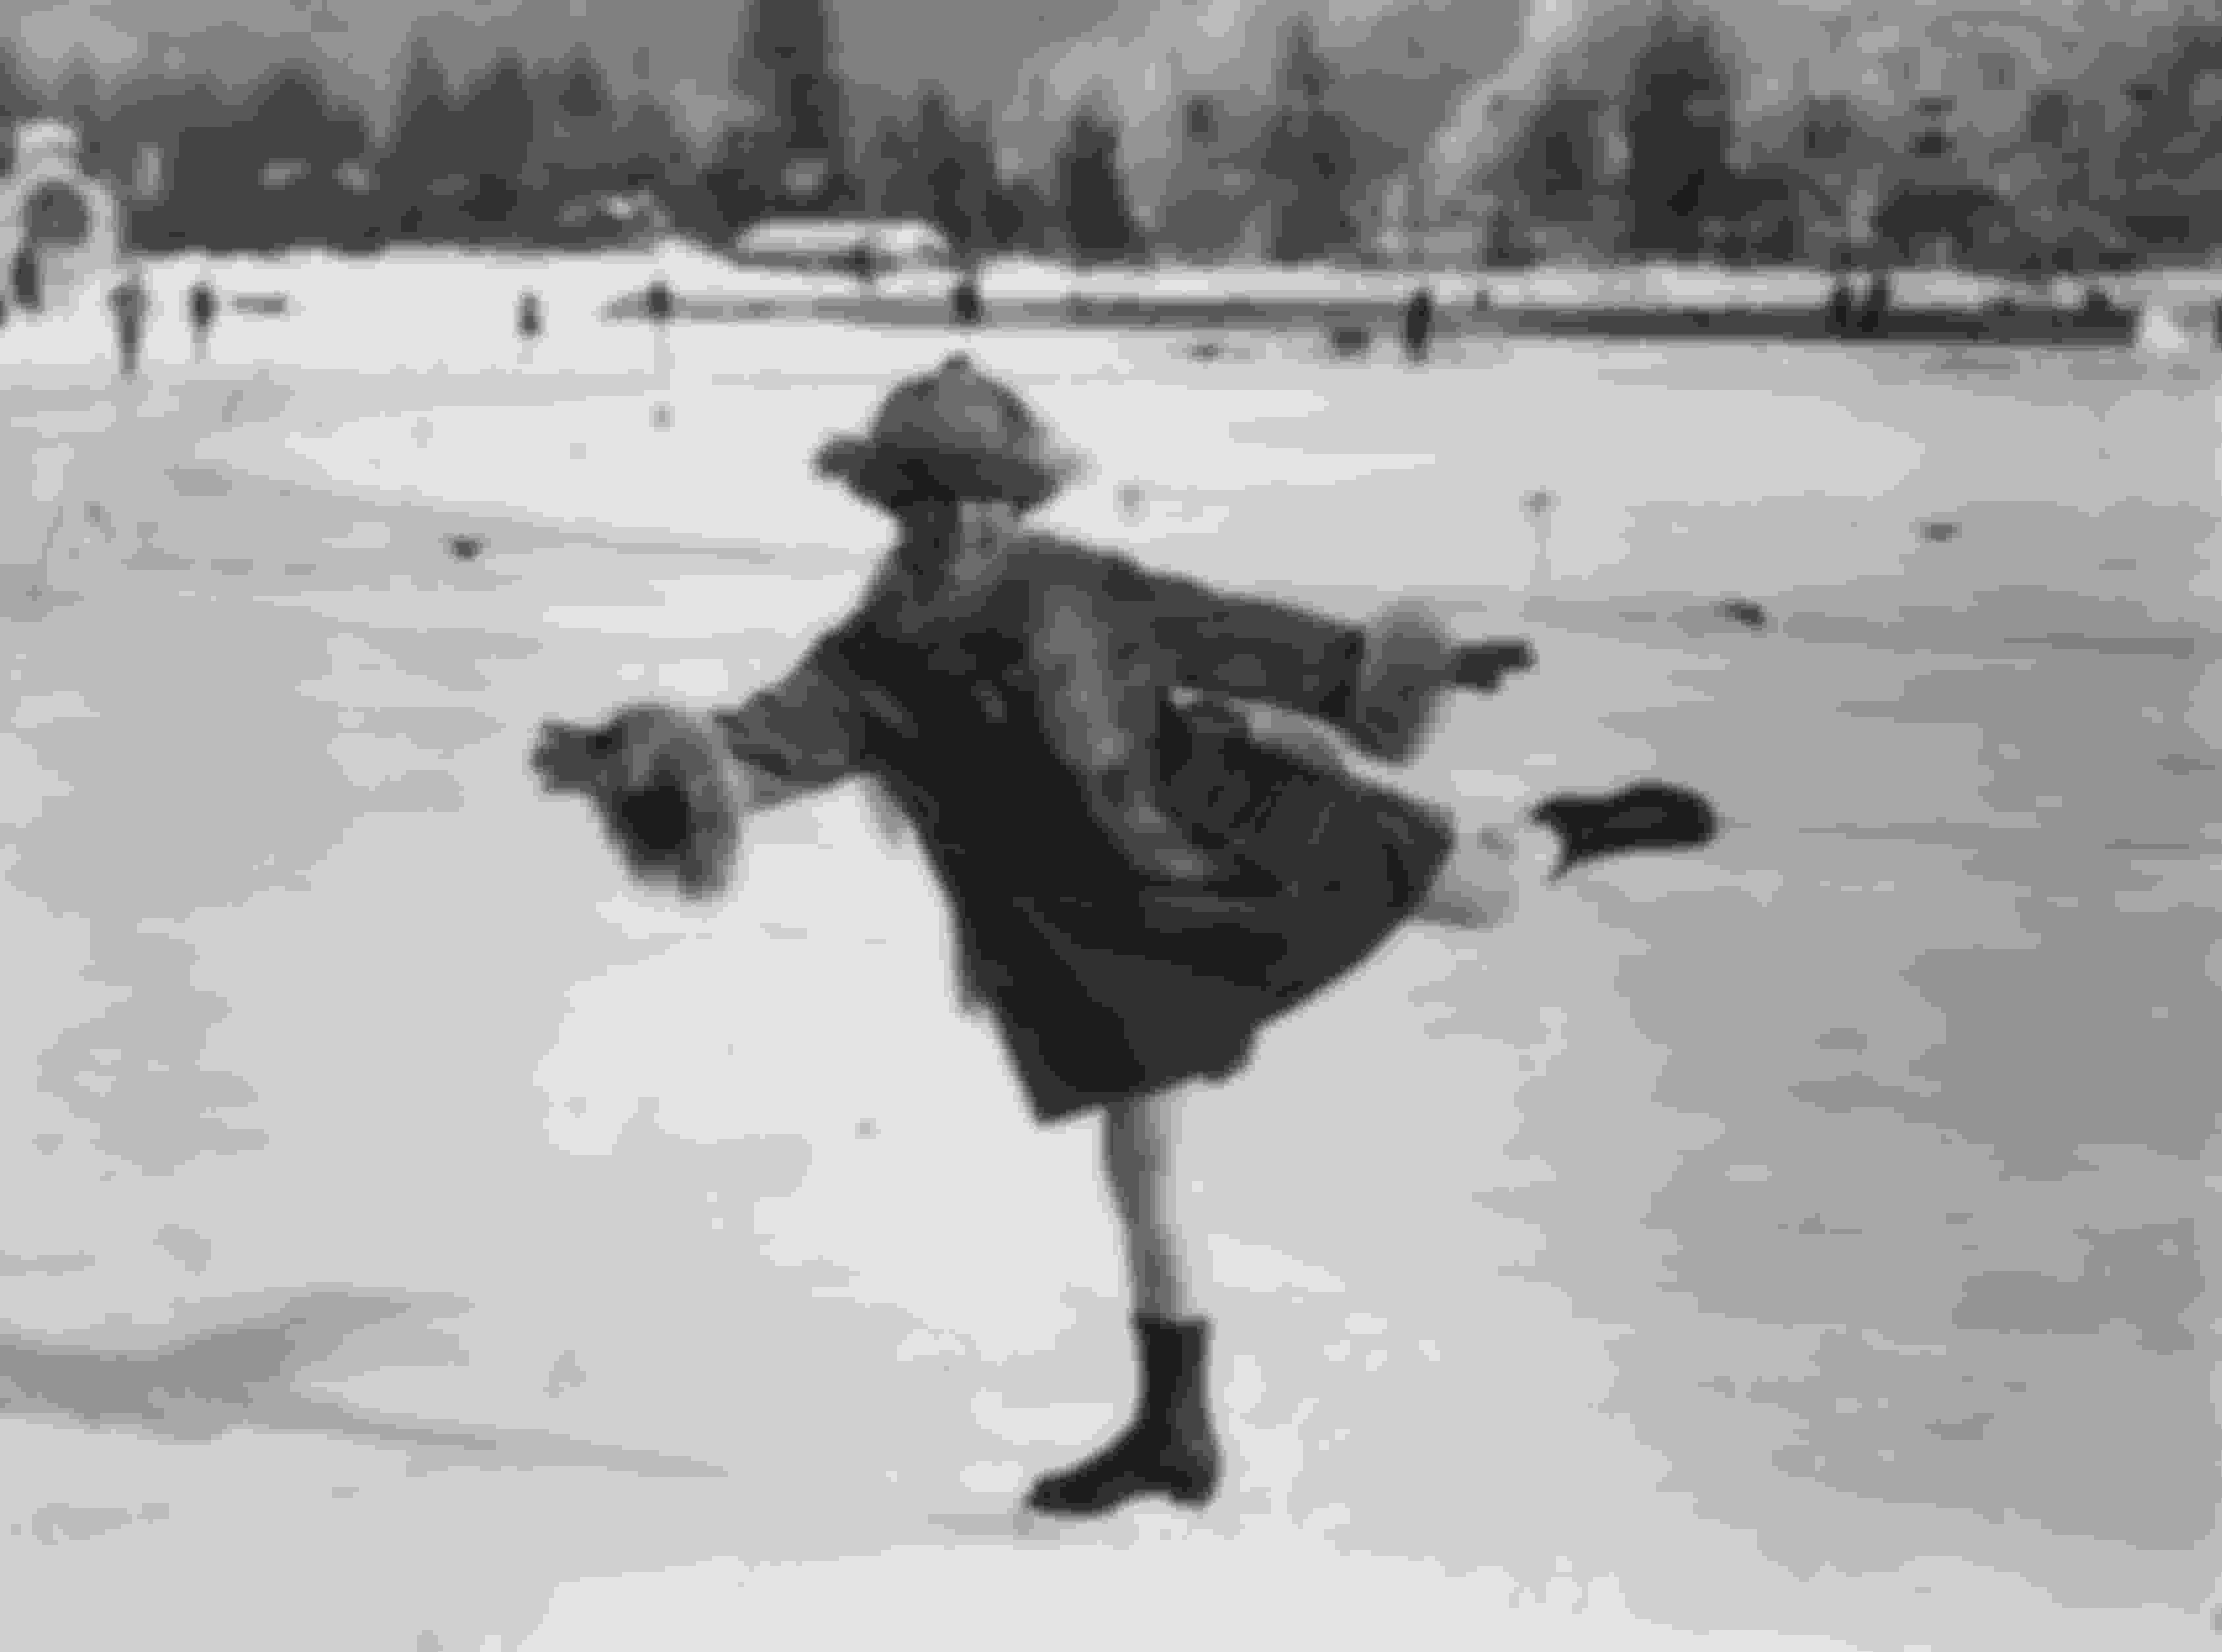 Sonja Henie on the ice at Chamonix during the Winter Olympics